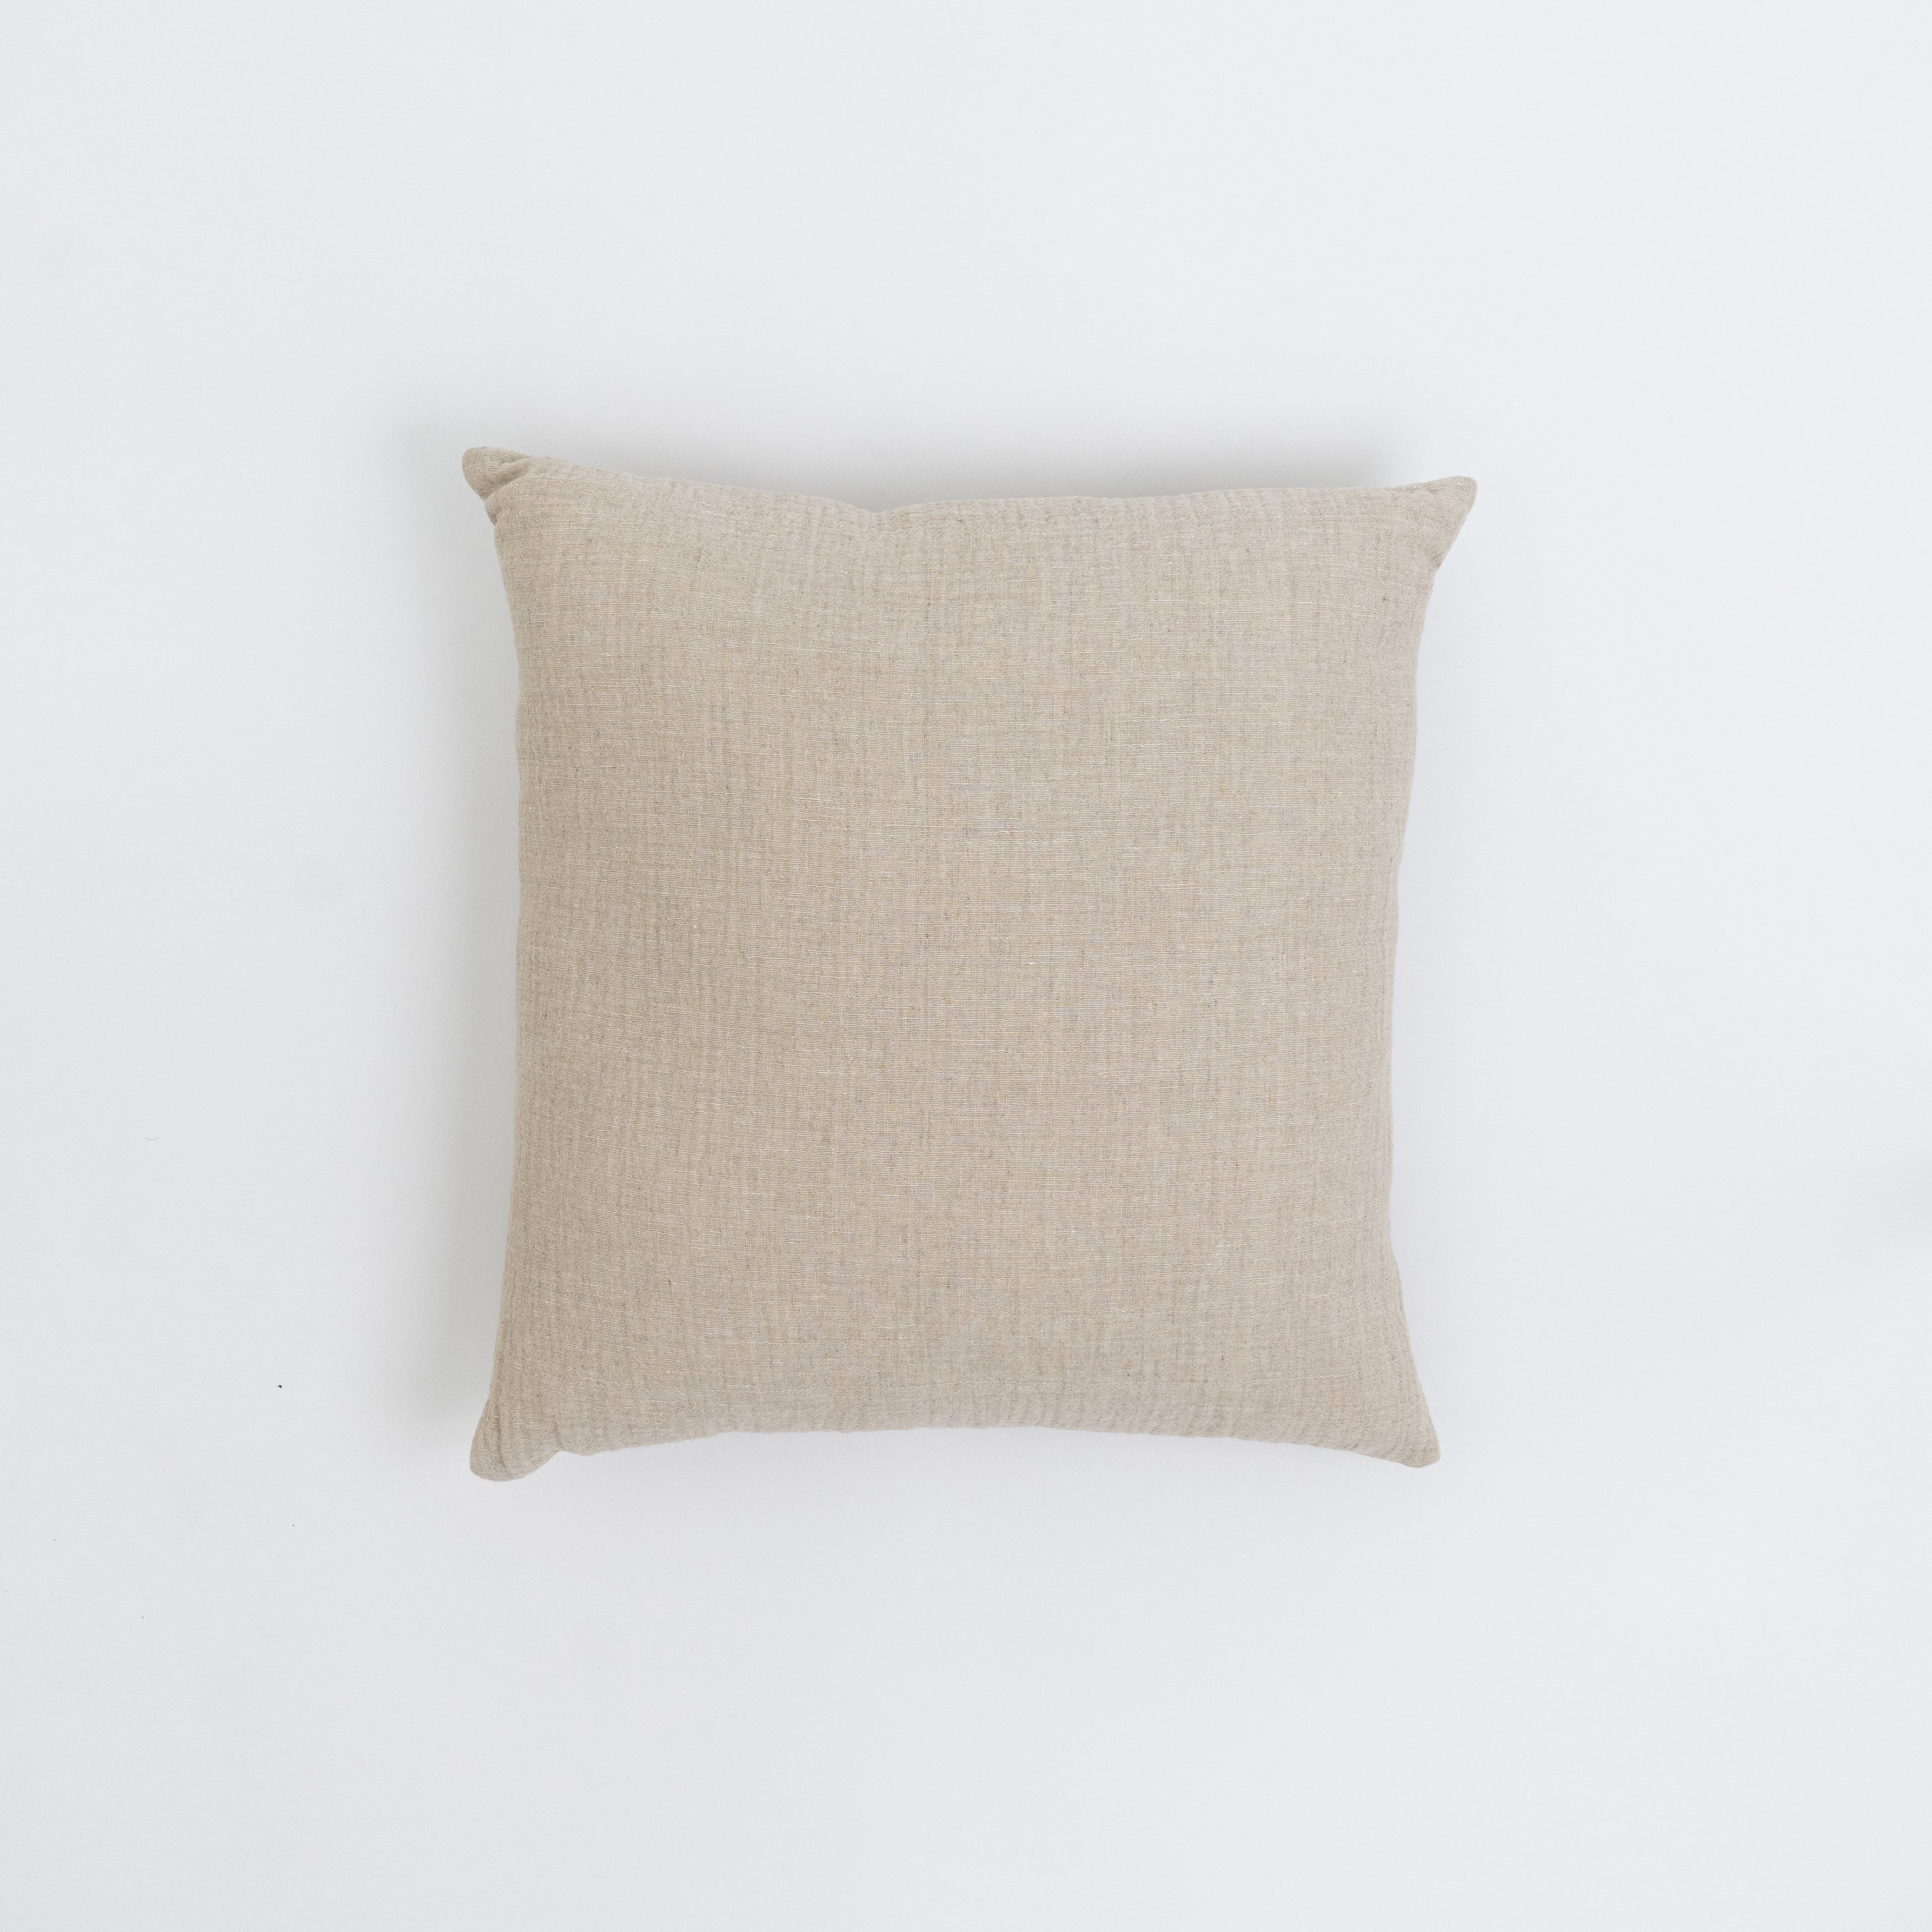 Cushion Cover Beige 45x45cm - Wood and Steel Furnitures